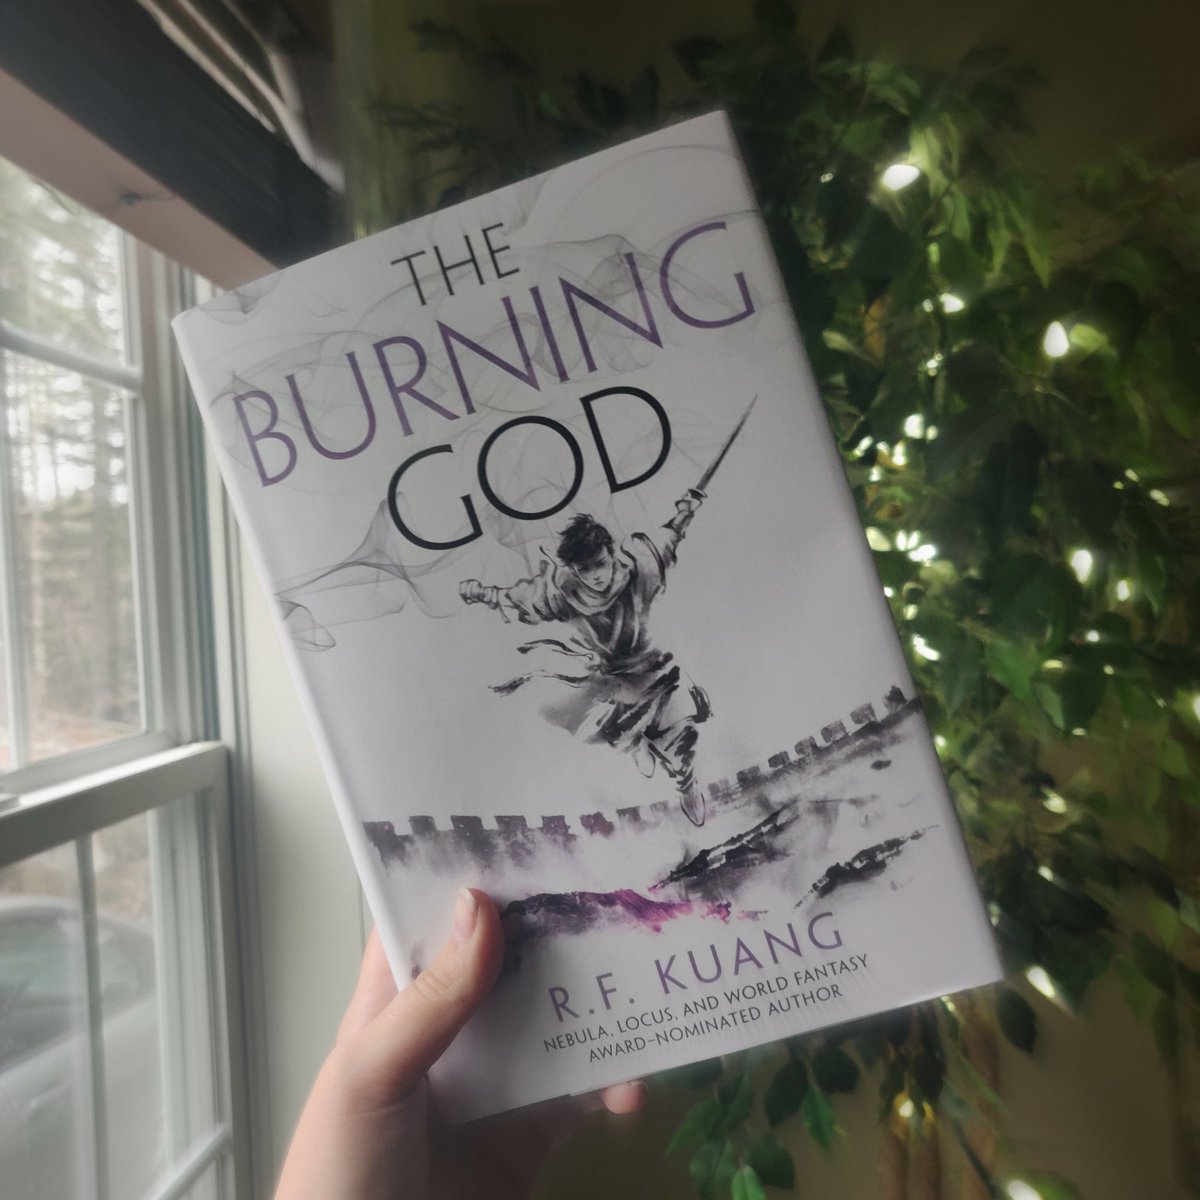 consider this my official thread, and your last chance to mute me (I'll be spoiler tagging anything)cr; the burning god by r. f. kuang